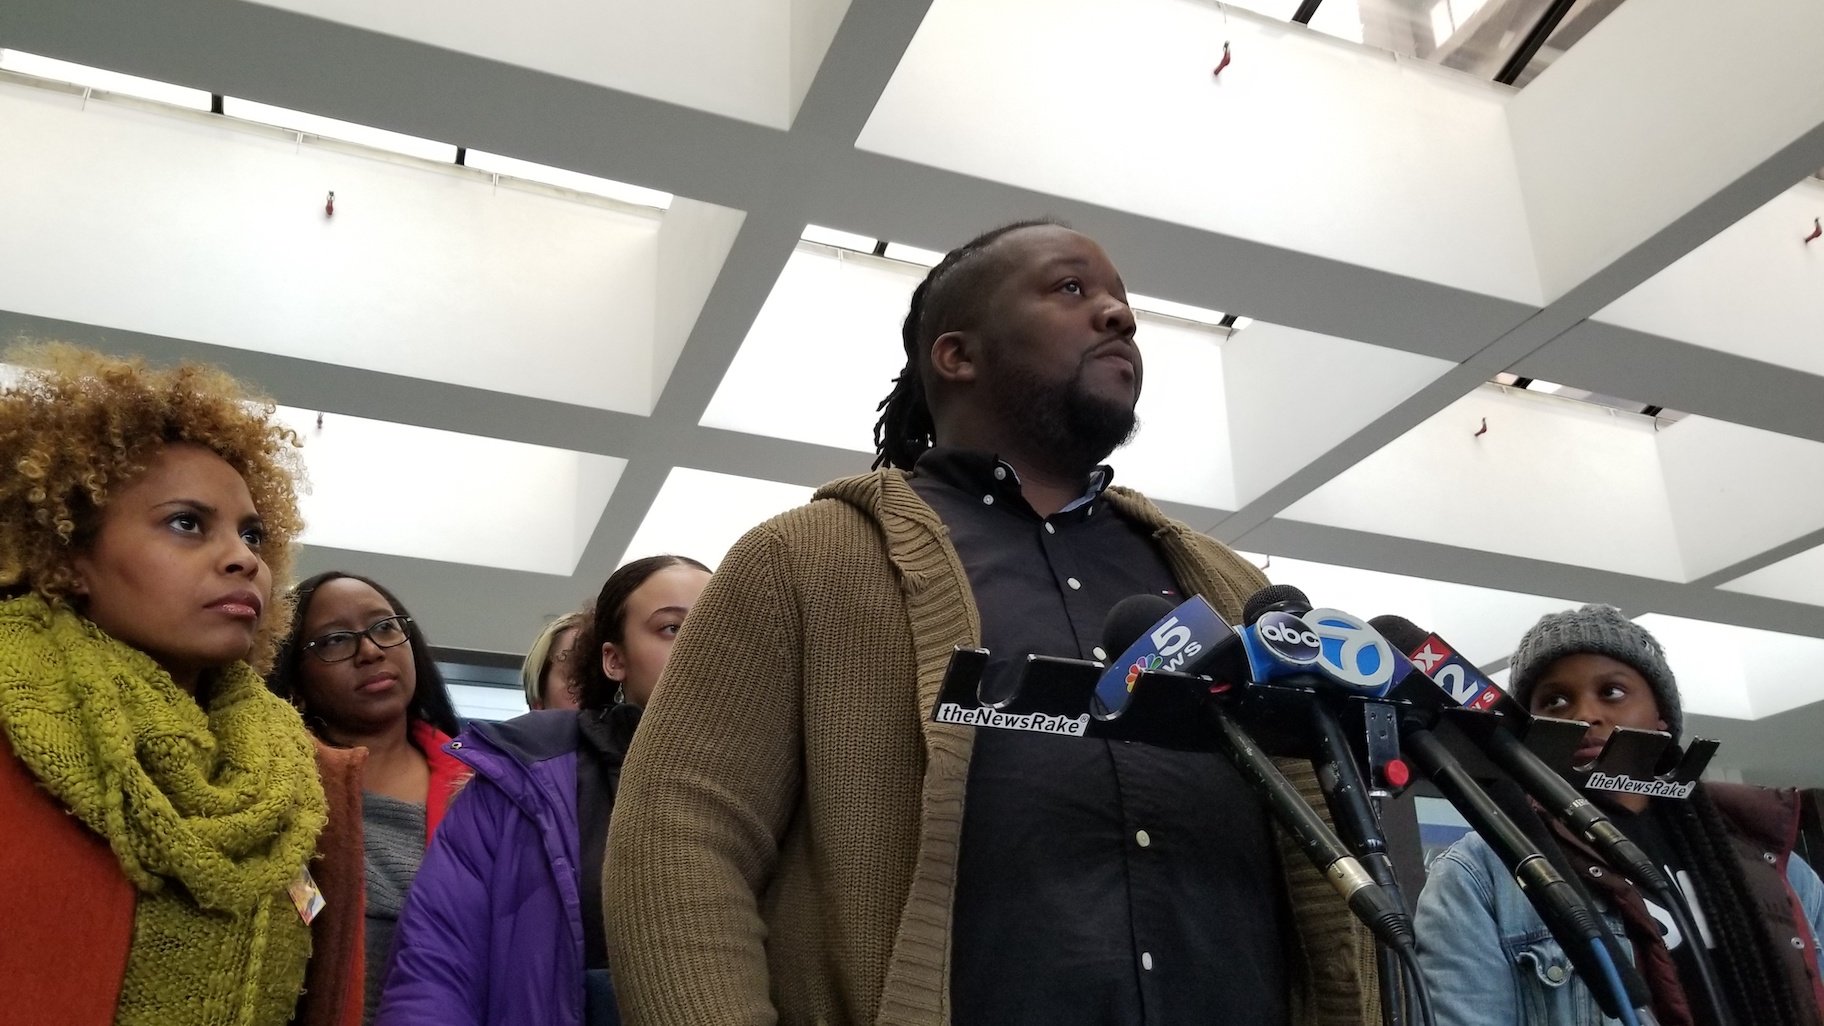 Rekia Boyd’s brother Martinez Sutton speaks with reporters following the hearing Tuesday, Nov. 19, 2019. (Matt Masterson / WTTW News)